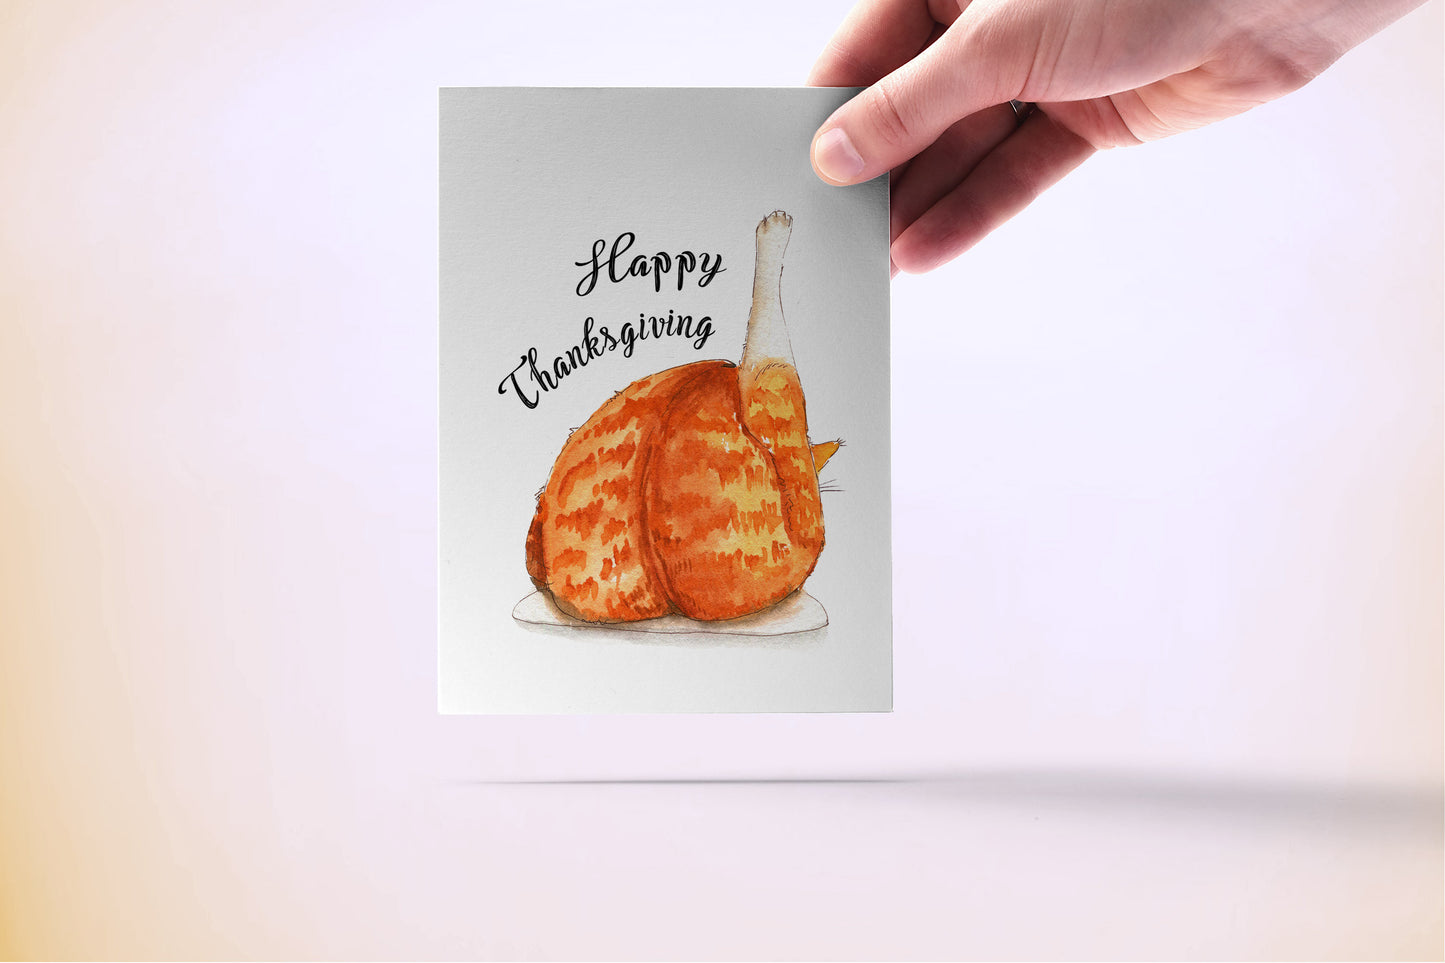 Cat Turkey Leg Happy Thanksgiving Cards Funny - Tabby Orange Cat Holiday Card For Cat Lover Gift - Handmade By Liyana Studio Greetings